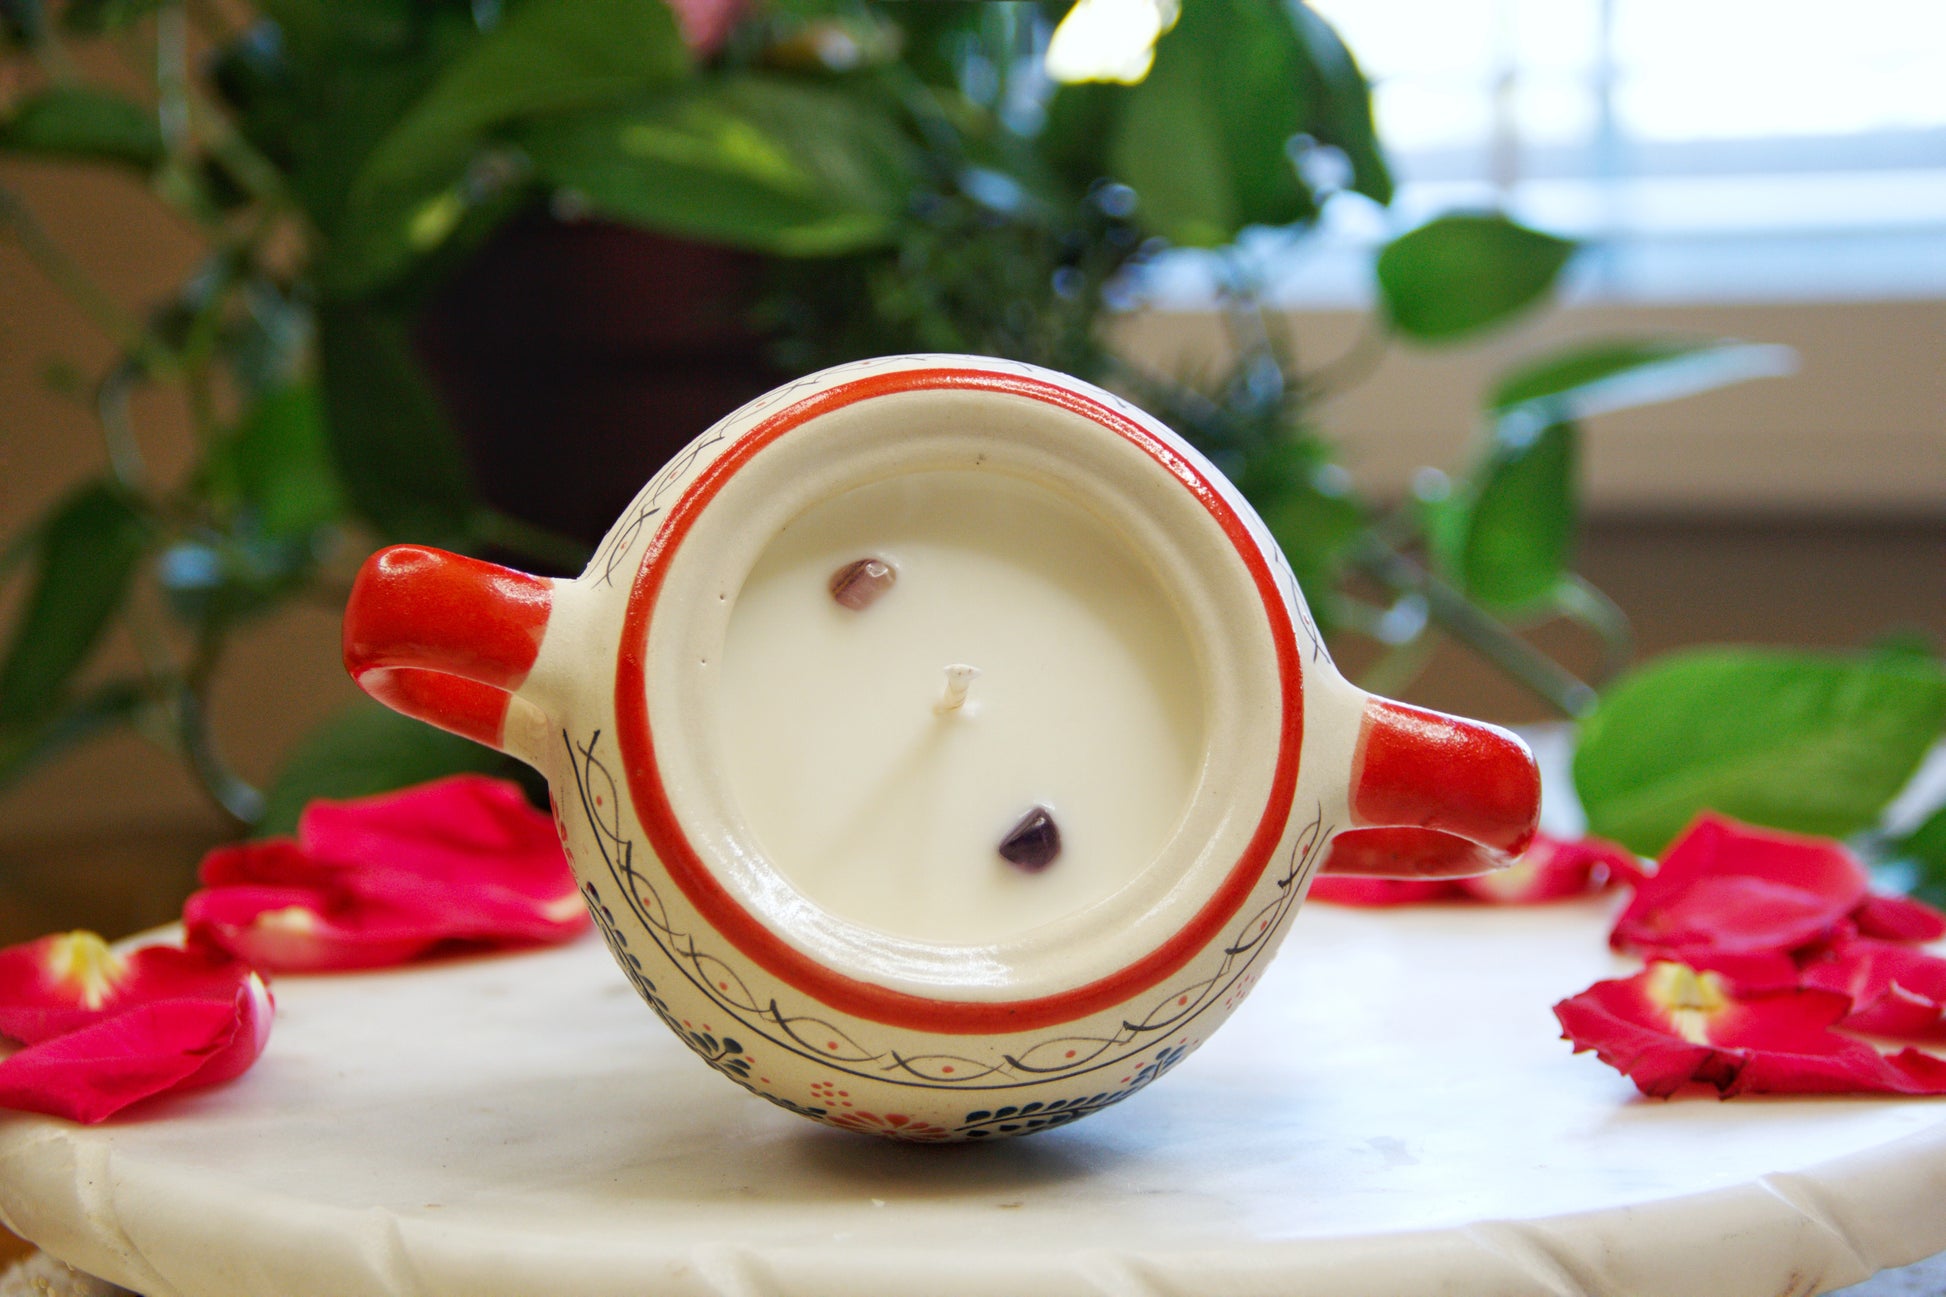 Top view of the handmade artisanal candle in a red floral design talavera with handle on both sides. Custom made by Artisan in Mexico. 100% All Natural Soy Candle.  Reuse the talavera as home decor or storage.